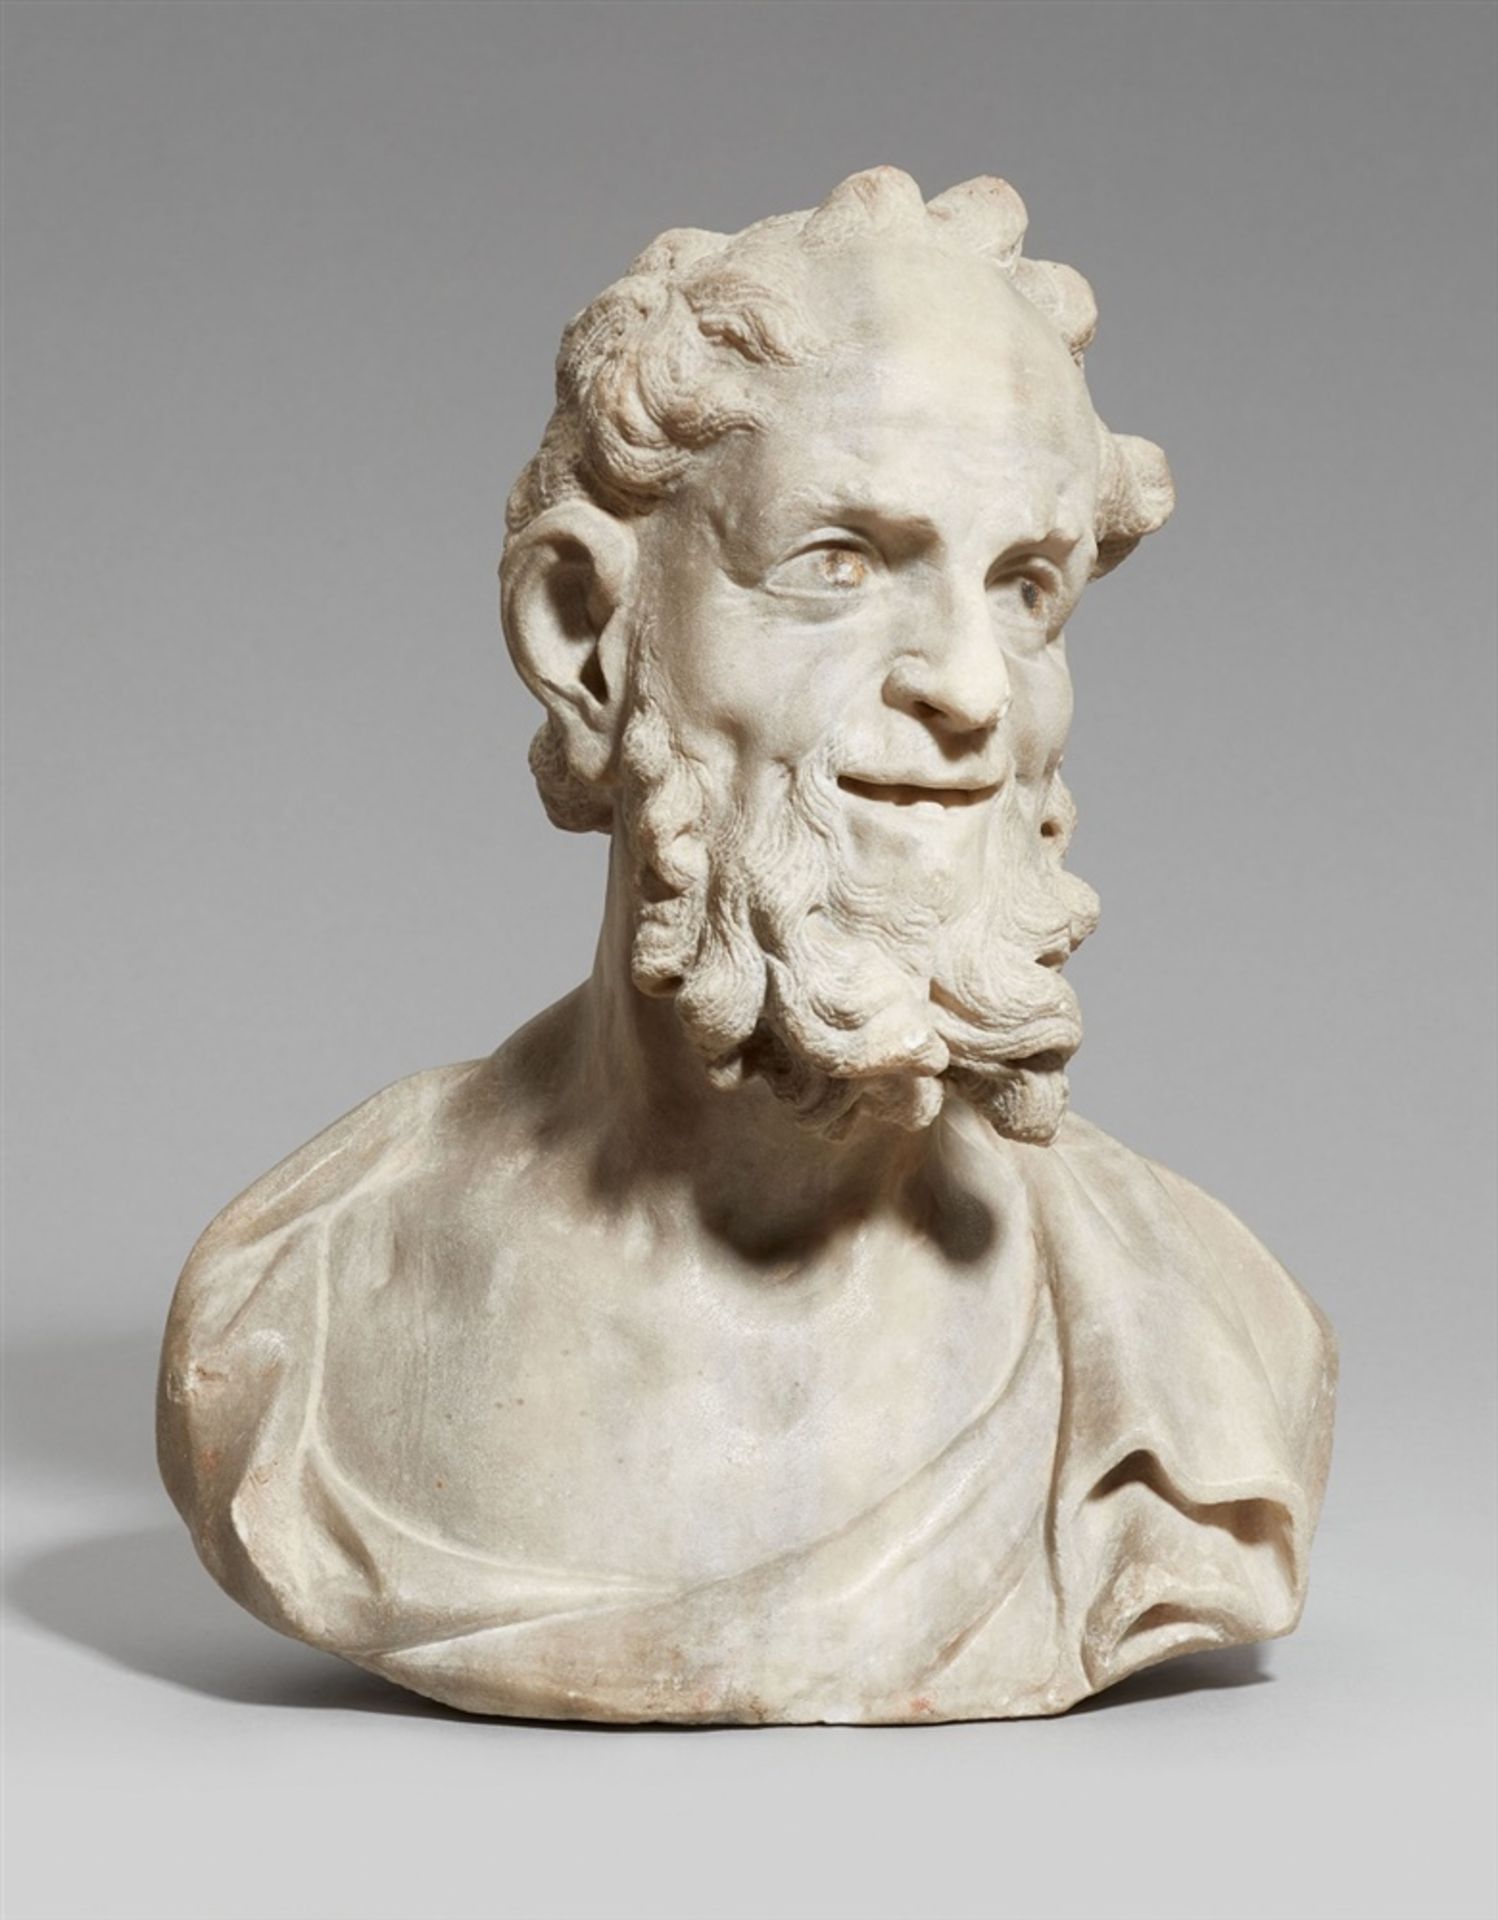 A marble bust of an old manAlmost life-sized pale grey banded marble bust with remnants of